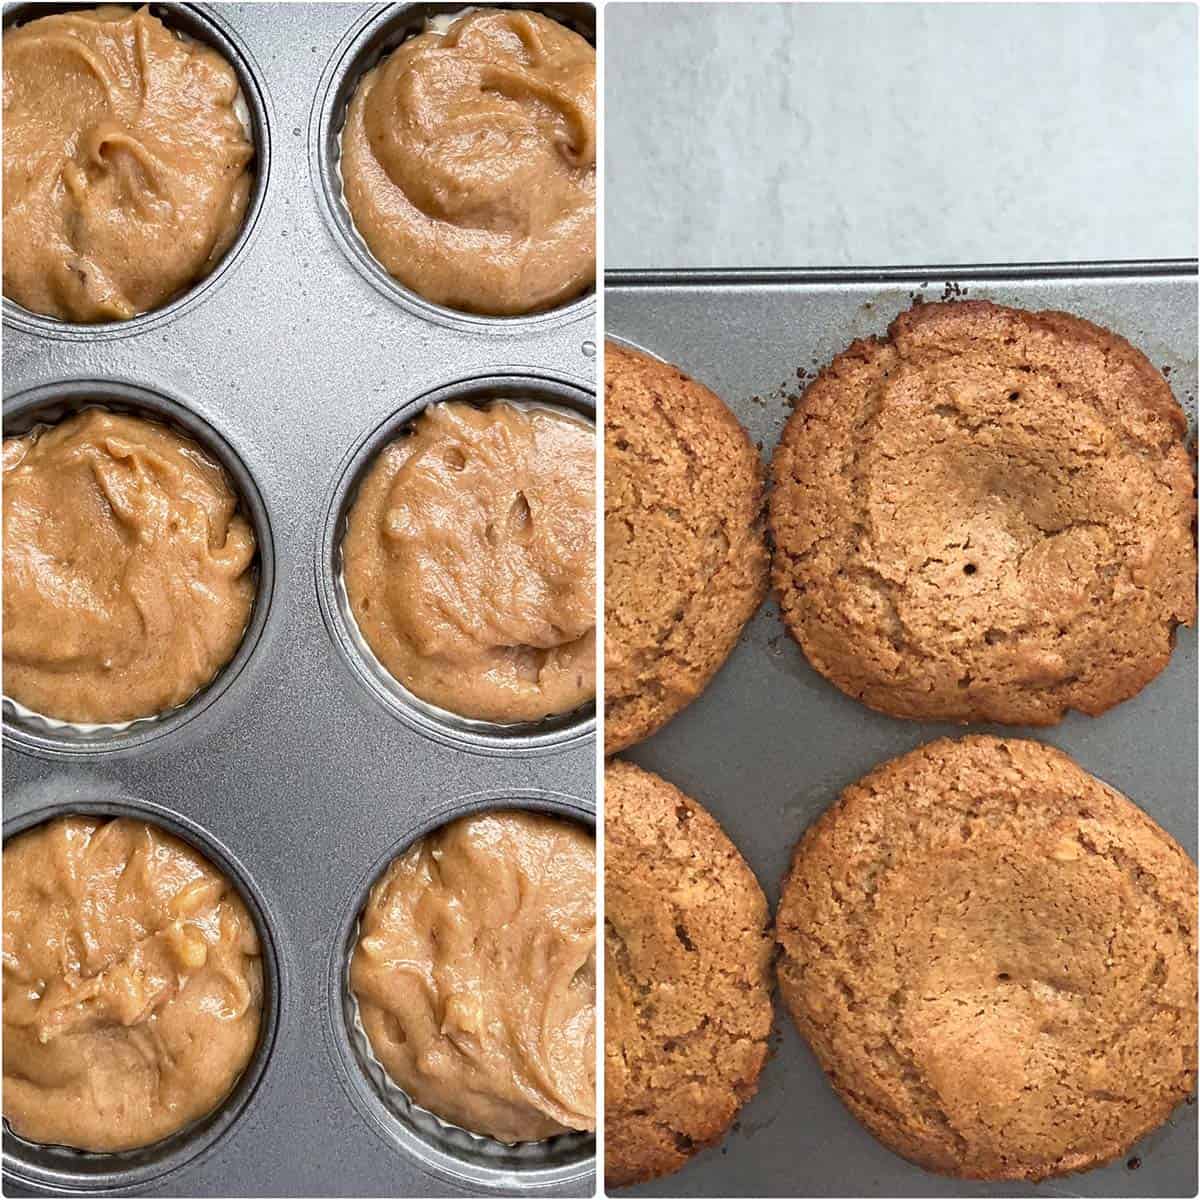 2 panel photo showing before and after baking the cakes.